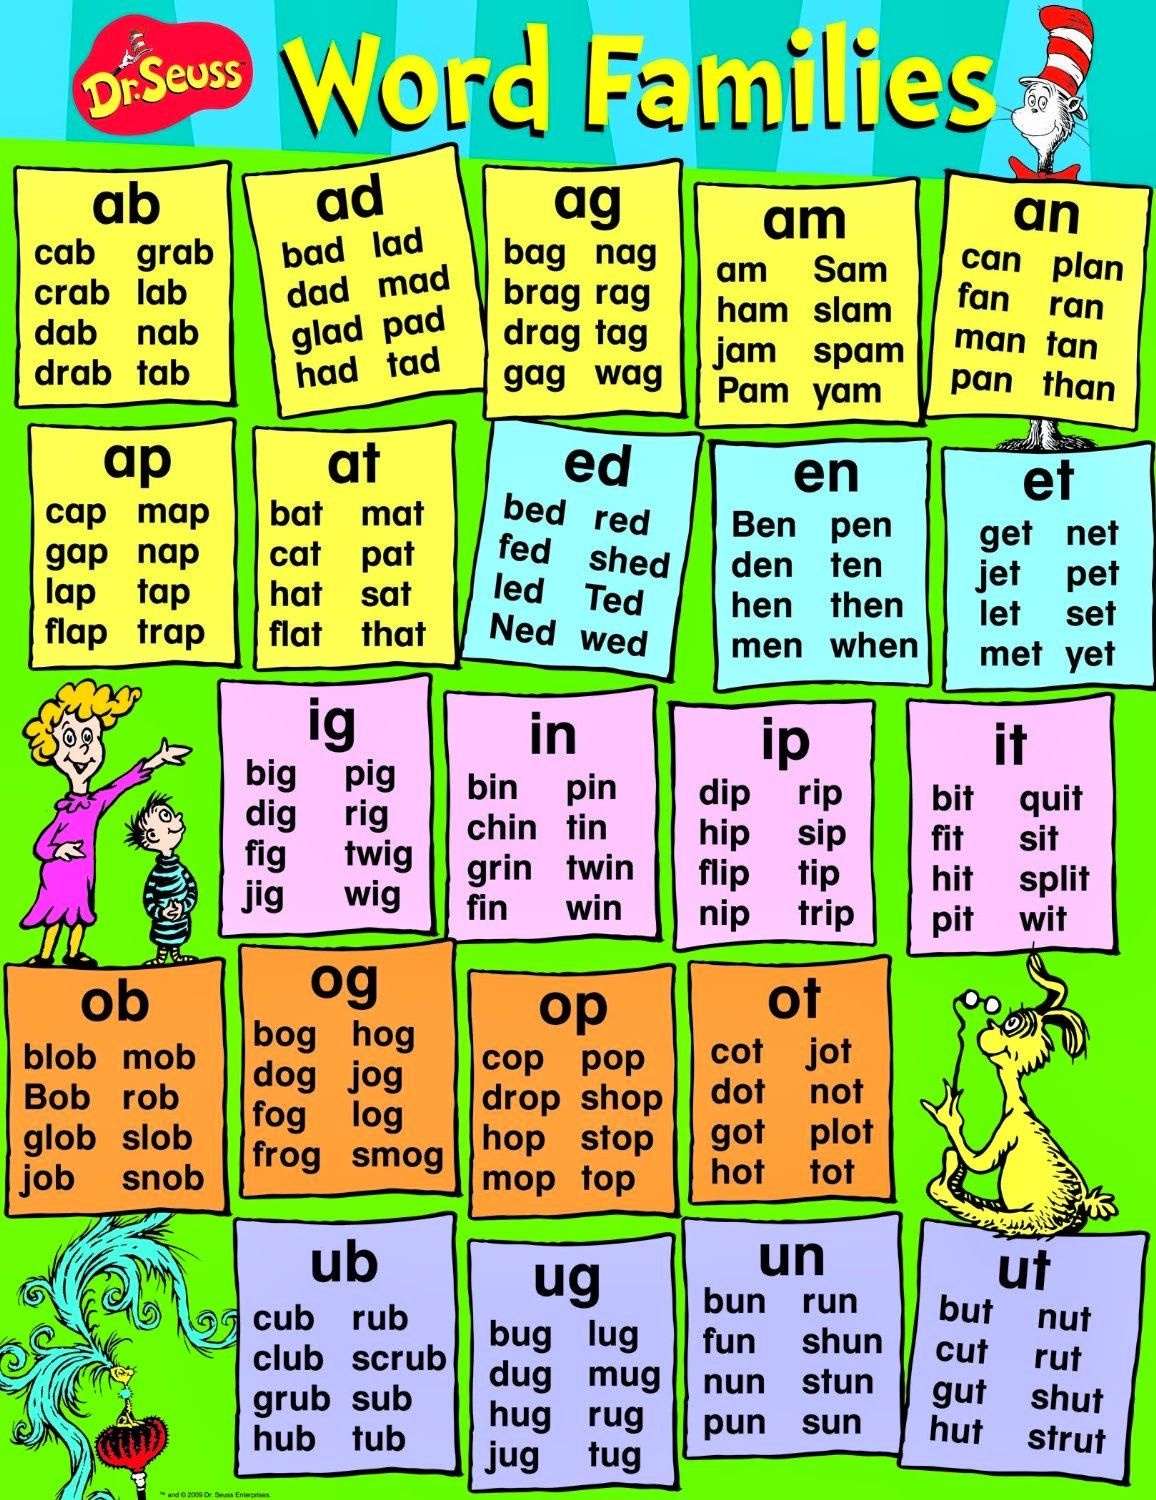 Dr. Seuss Free Activities And Other Resources For Kids | Kid - Free Printable Word Family Poems